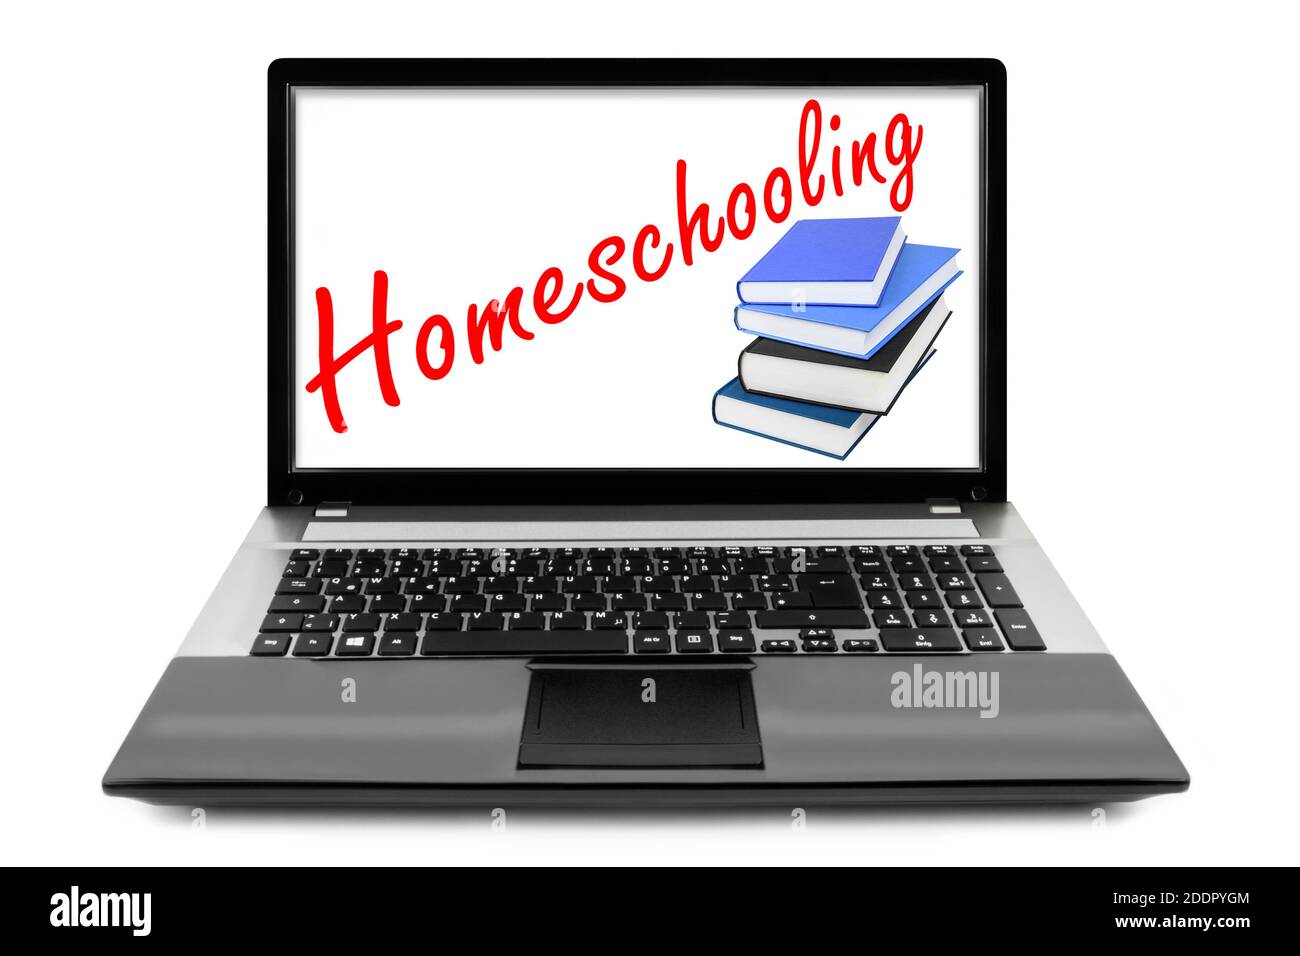 Homeschooling and laptop against white background Stock Photo